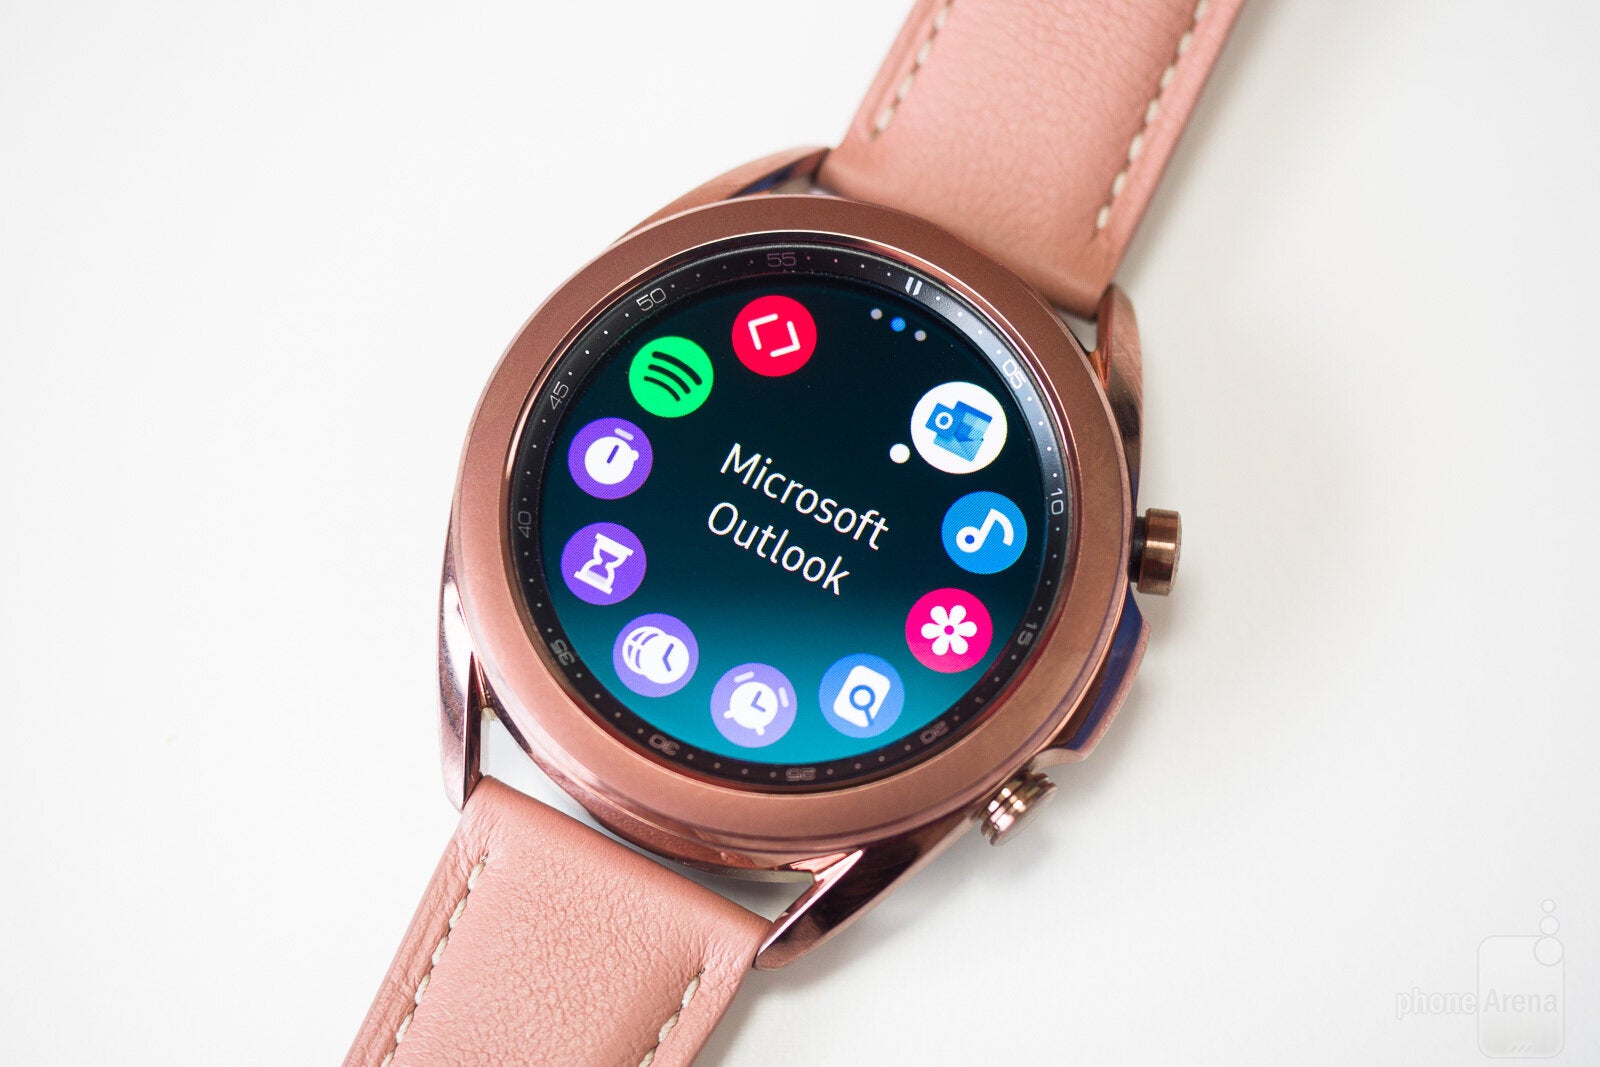 Samsung's Galaxy Watch 3 - Galaxy Watch 4 new OS confirmed, more feature leaks